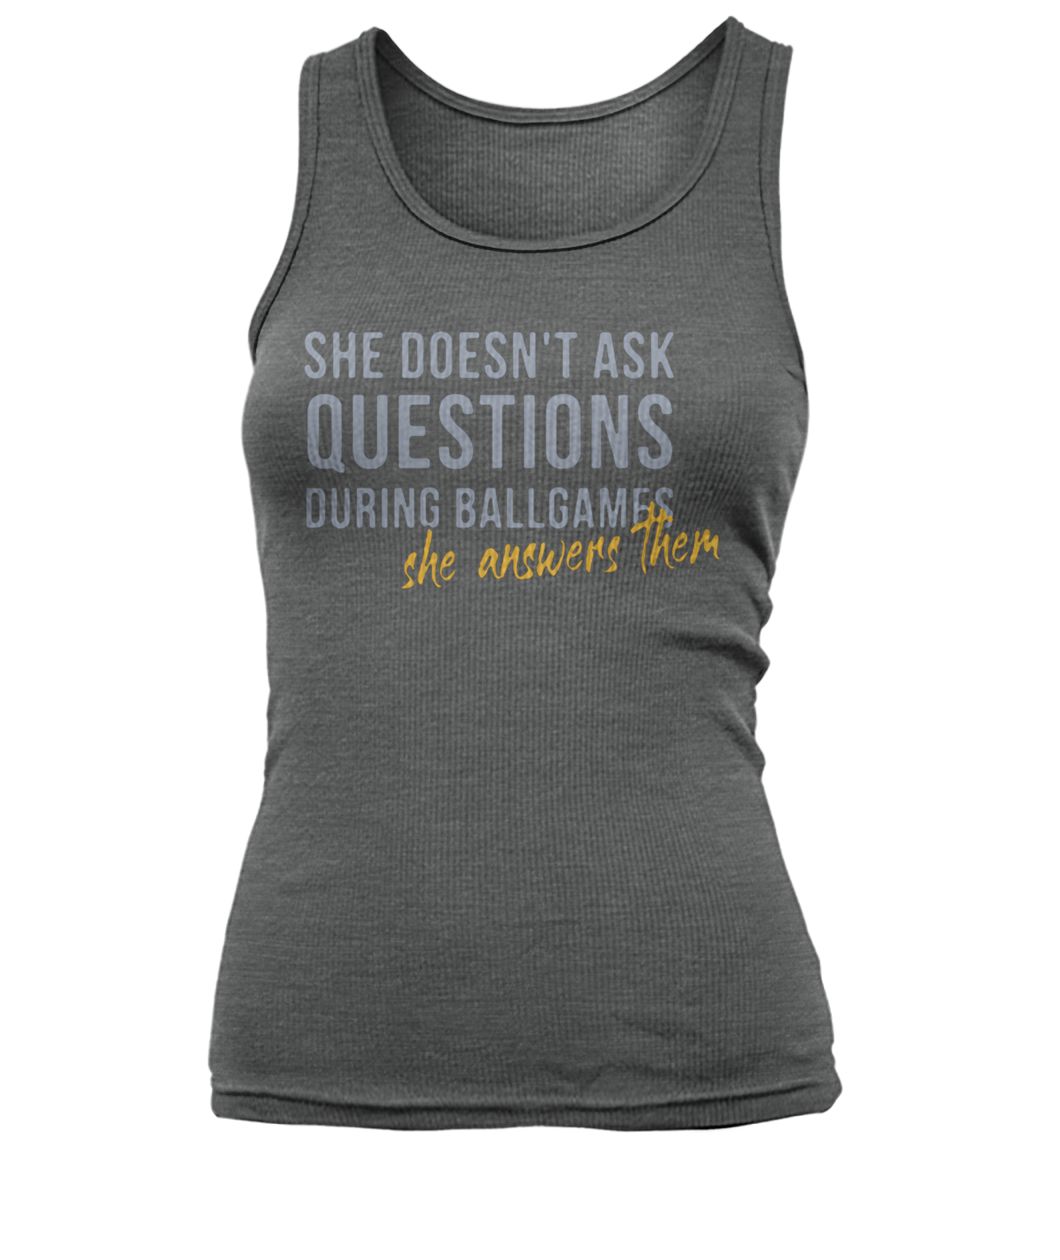 She doesn't ask questions during ballgames she answers them women's tank top